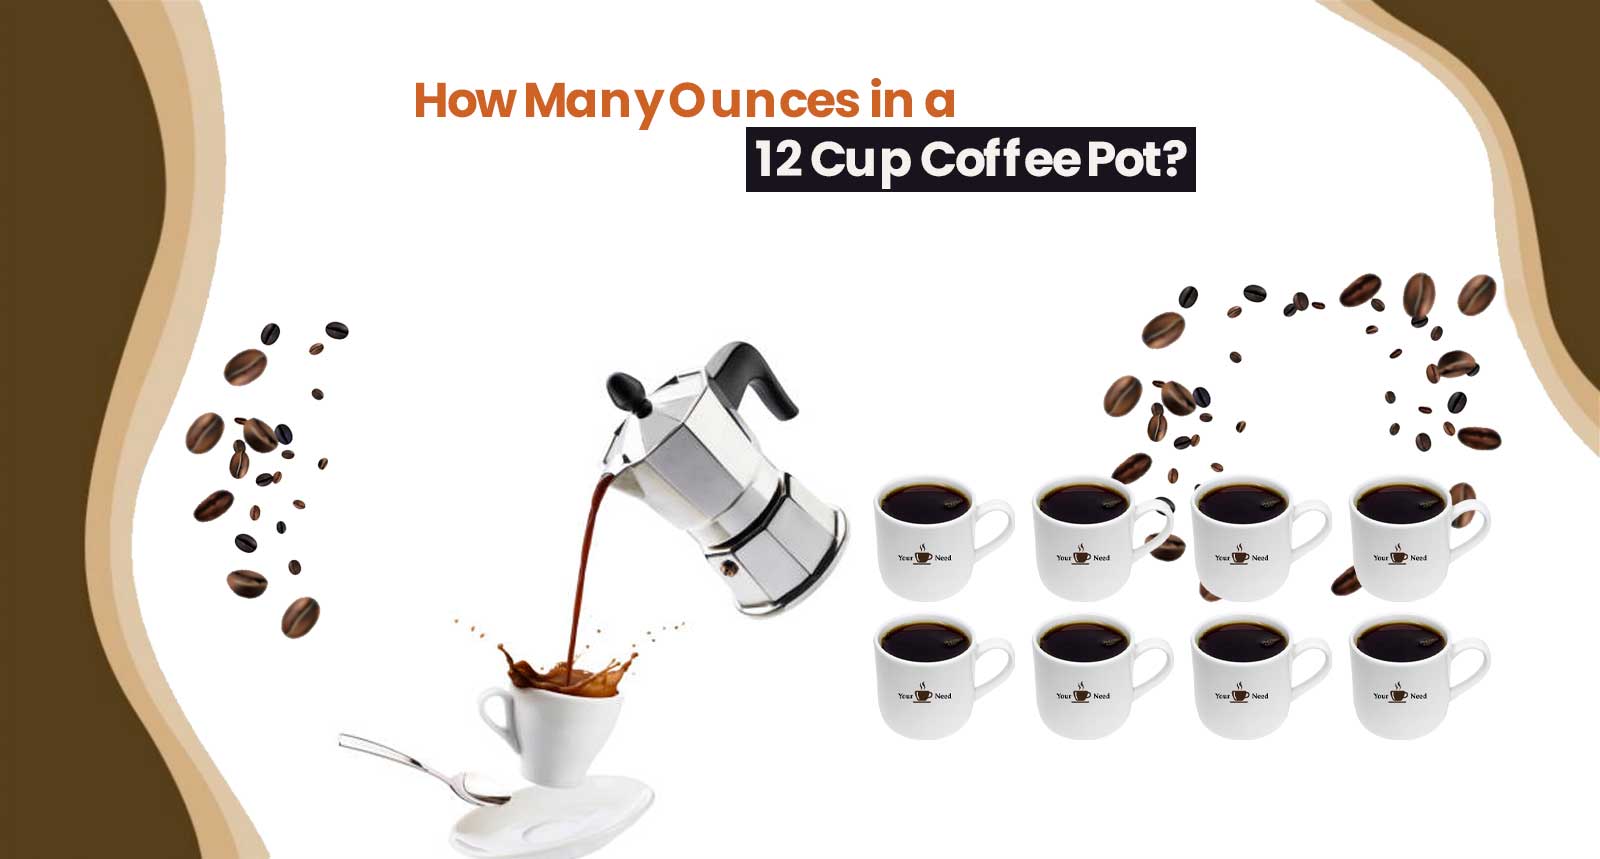 how many ounces in a 12 cup coffee pot